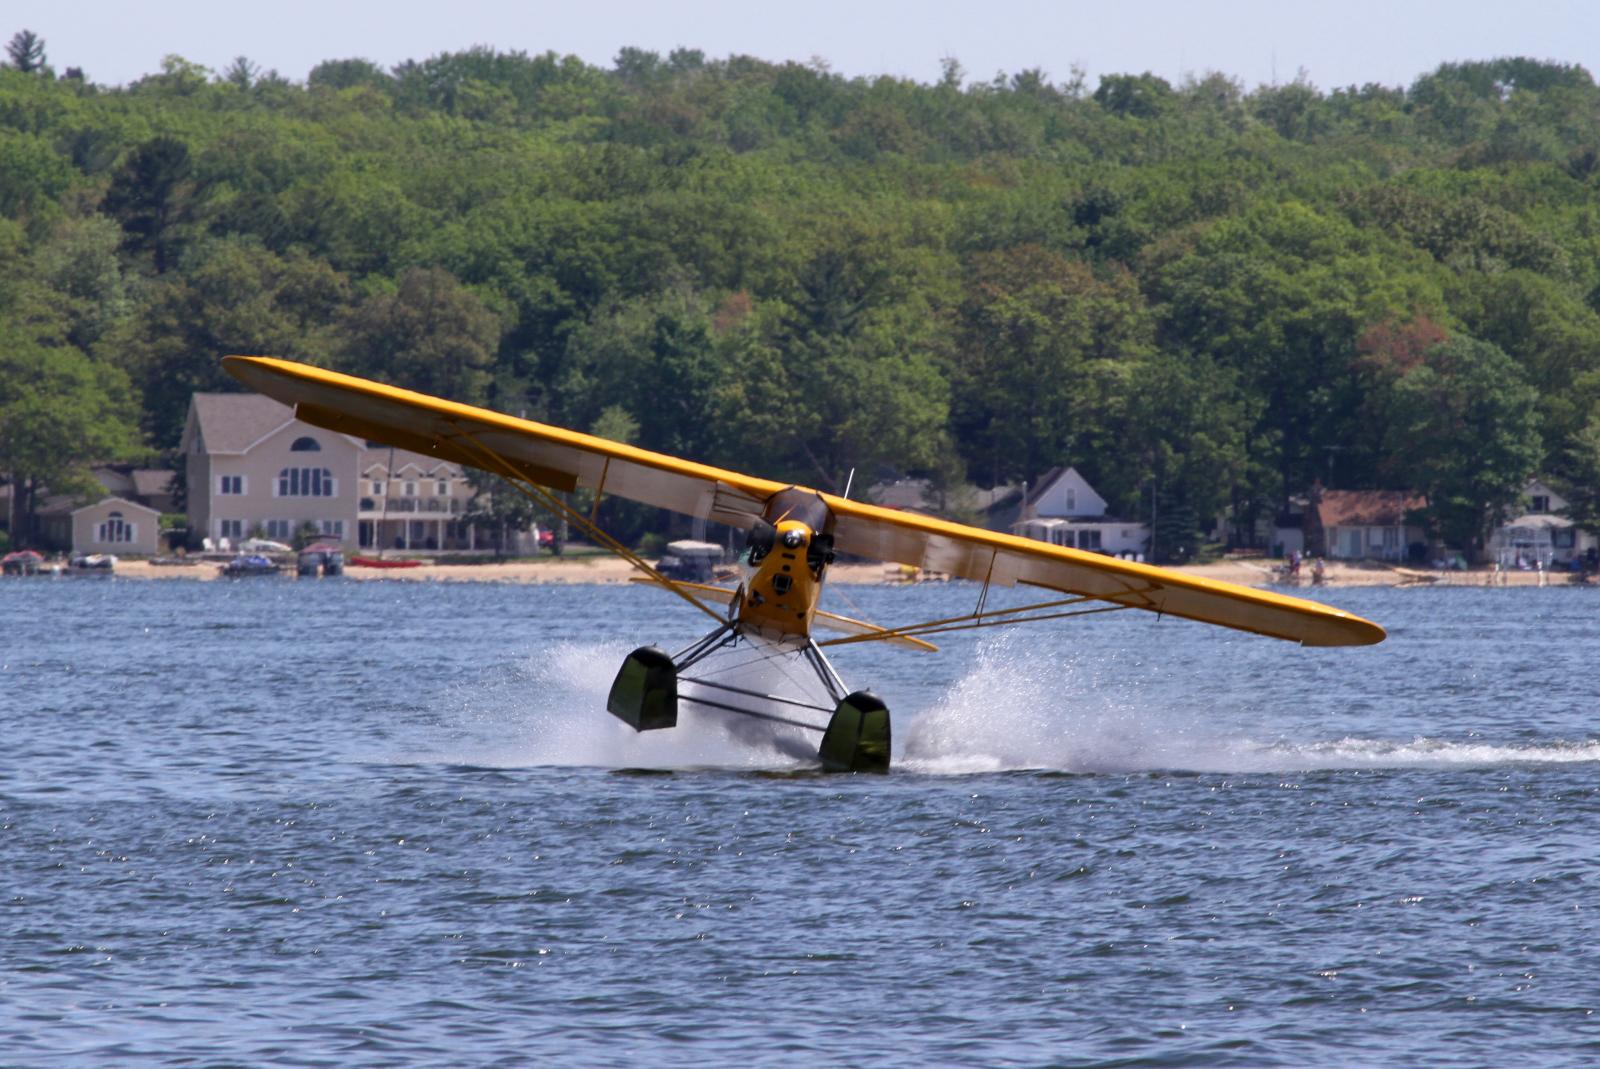 a biplane flying in the sky over the water